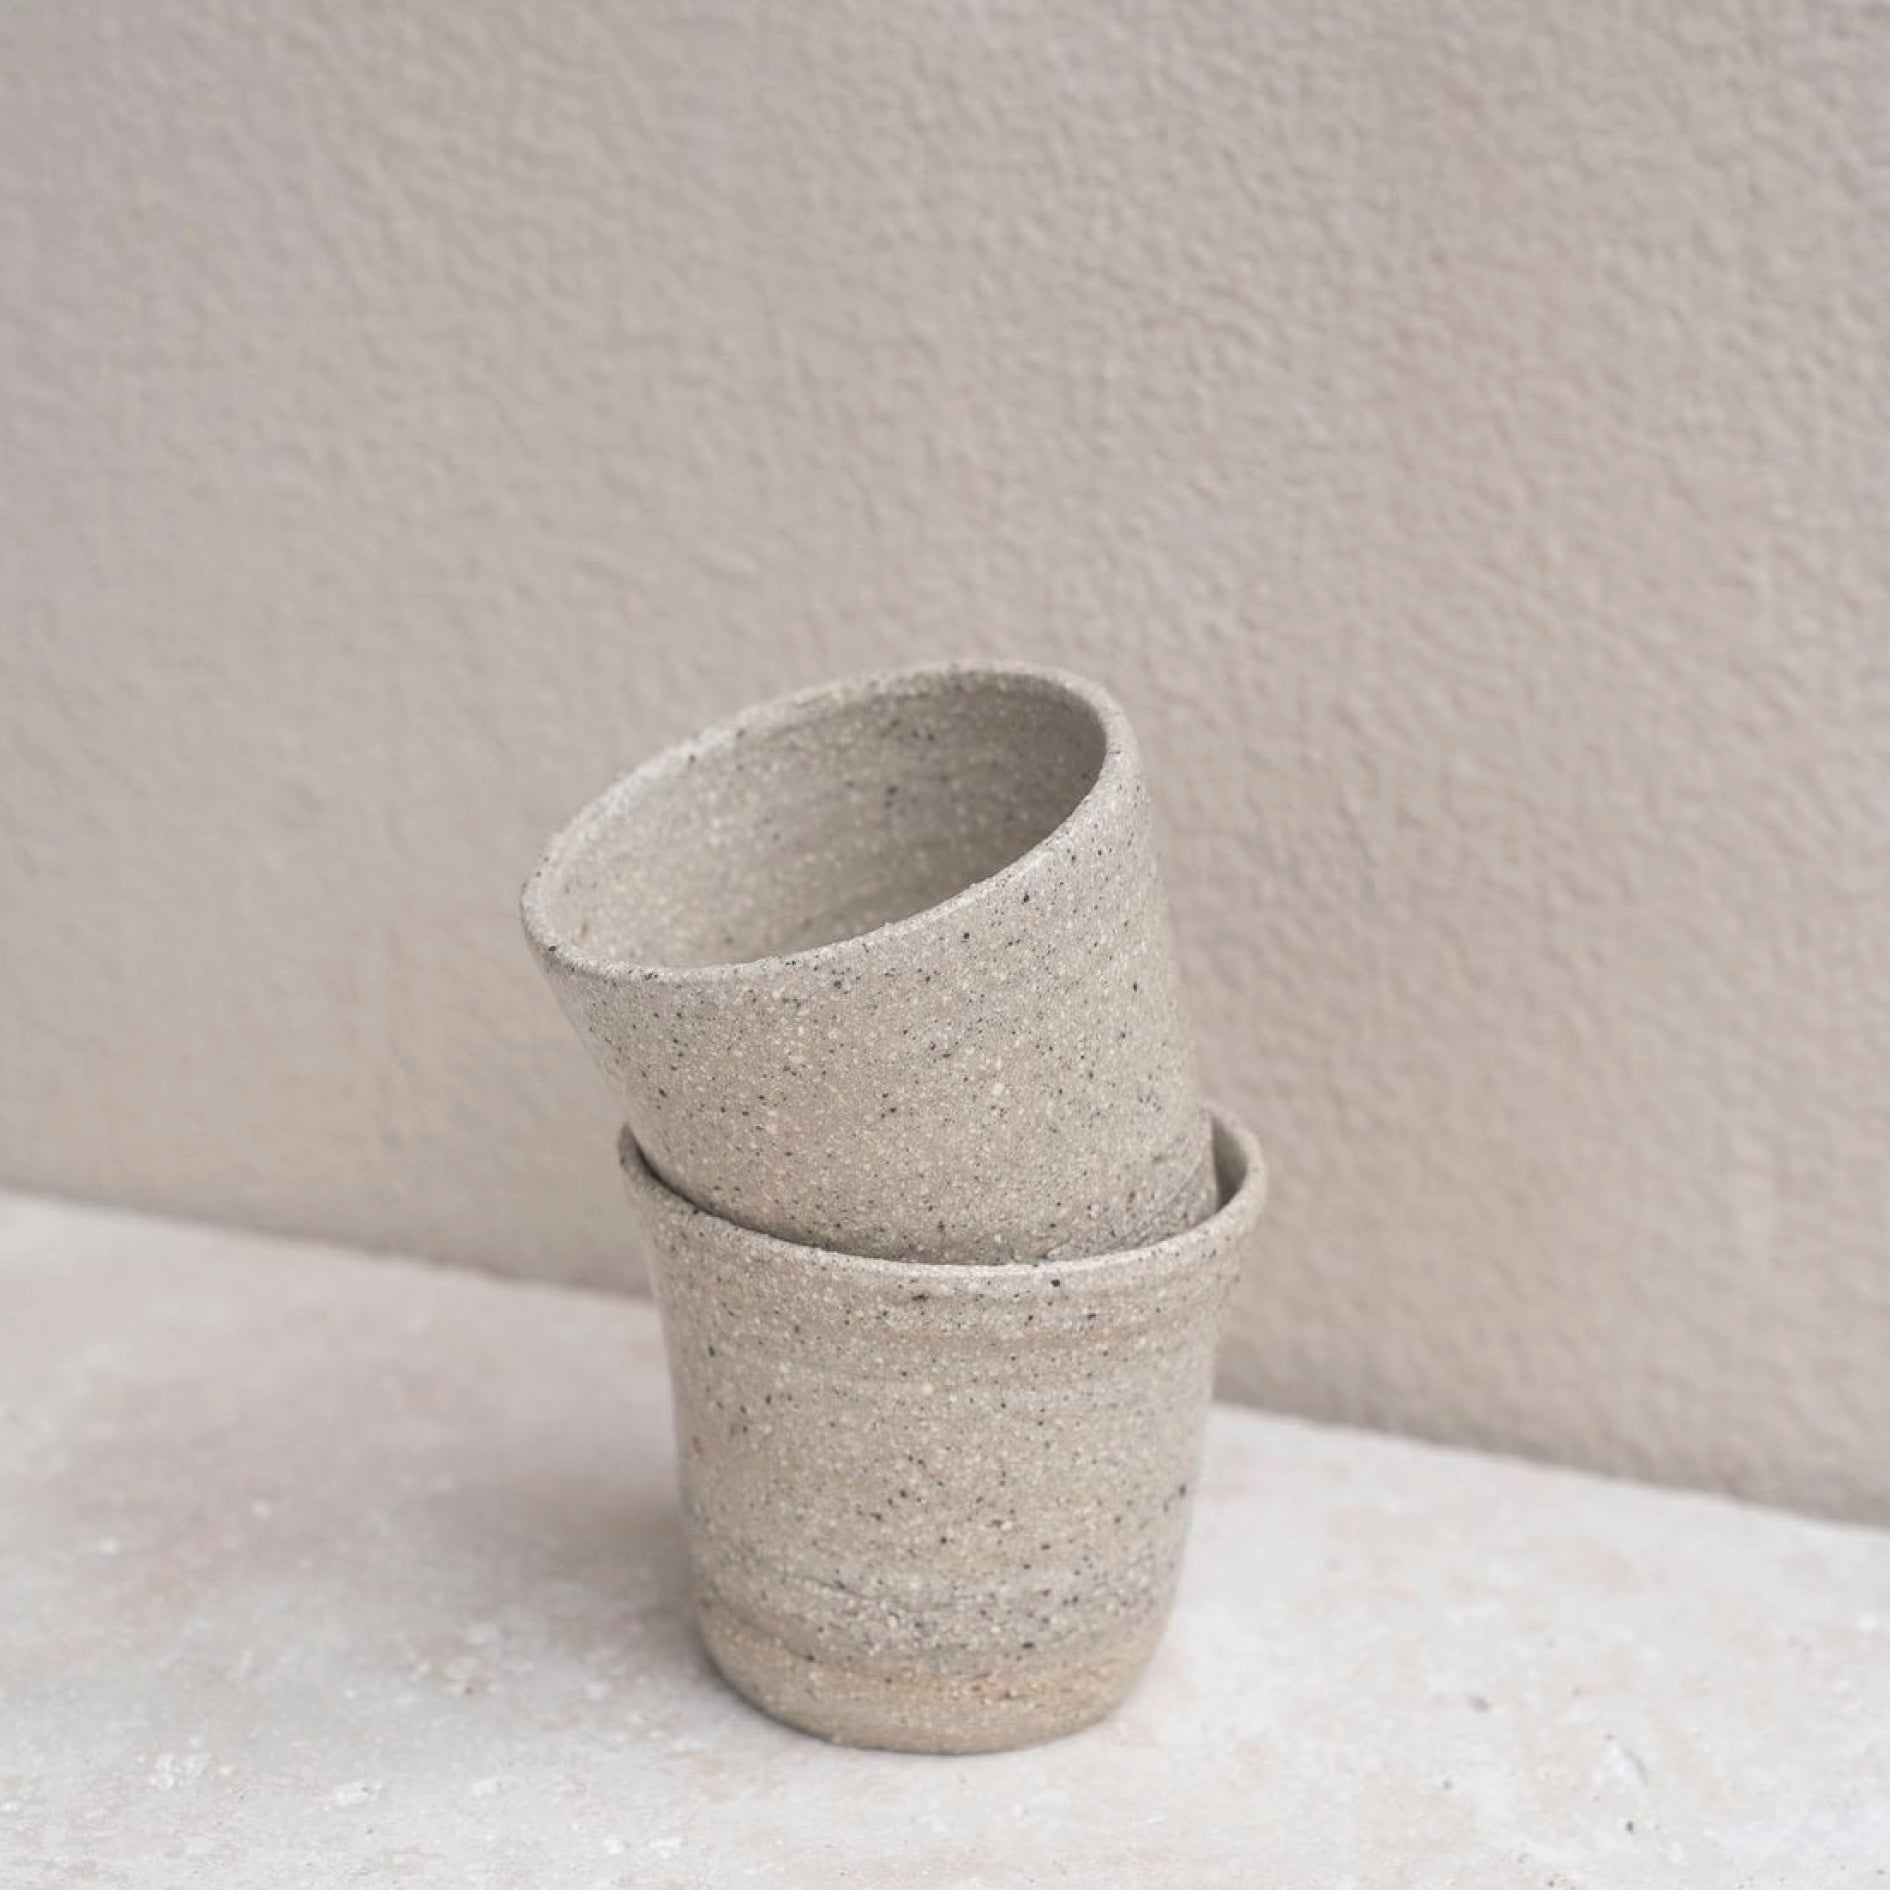 Limited Edition Ceramic Cups